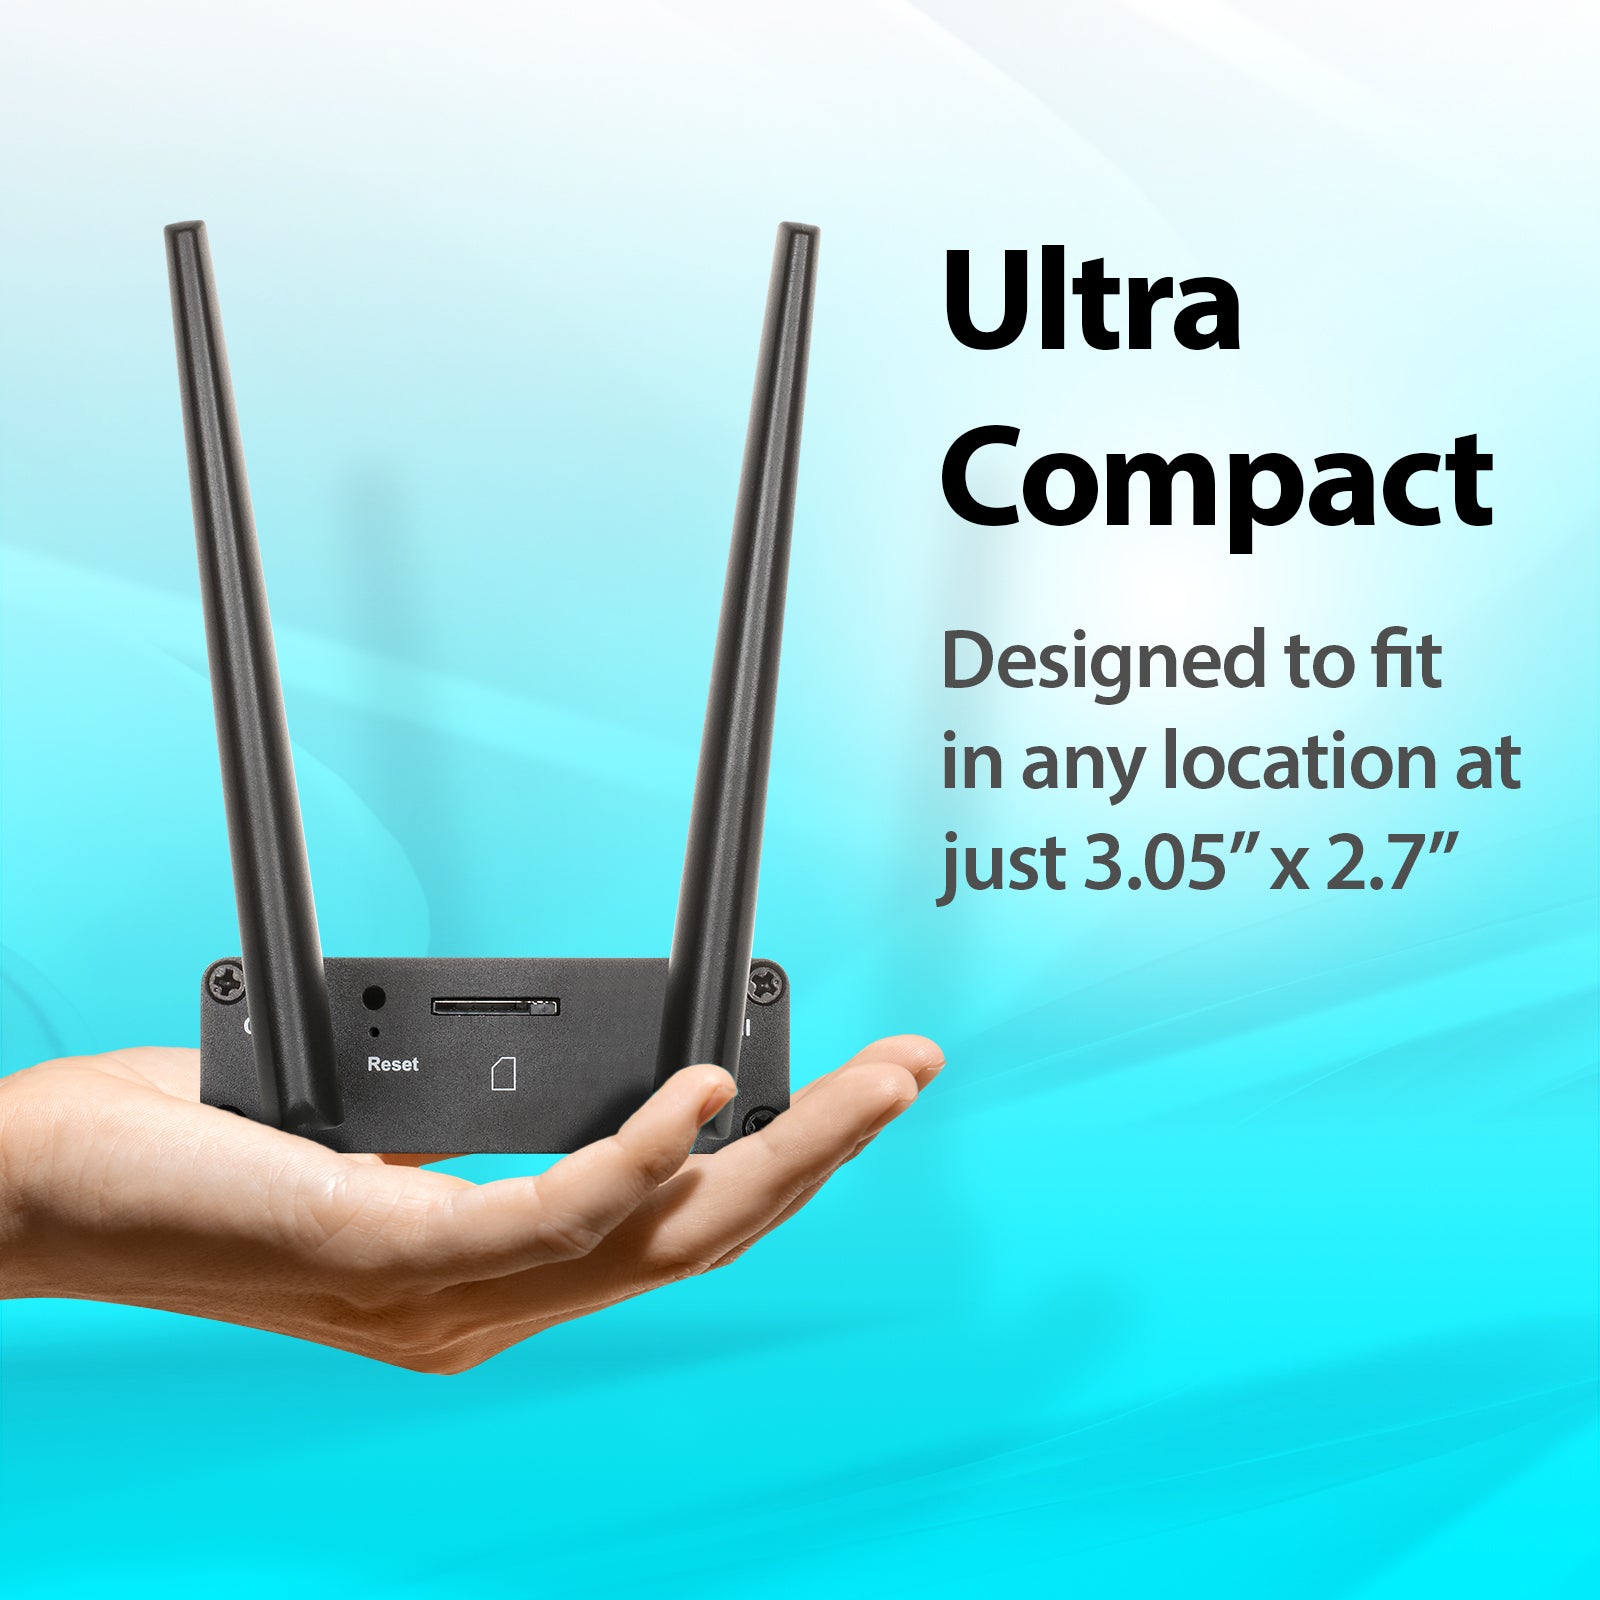 Ultra Compact At only 3.05" x 2.7", the DWM-311-B1 is designed to easily fit within your M2M design.